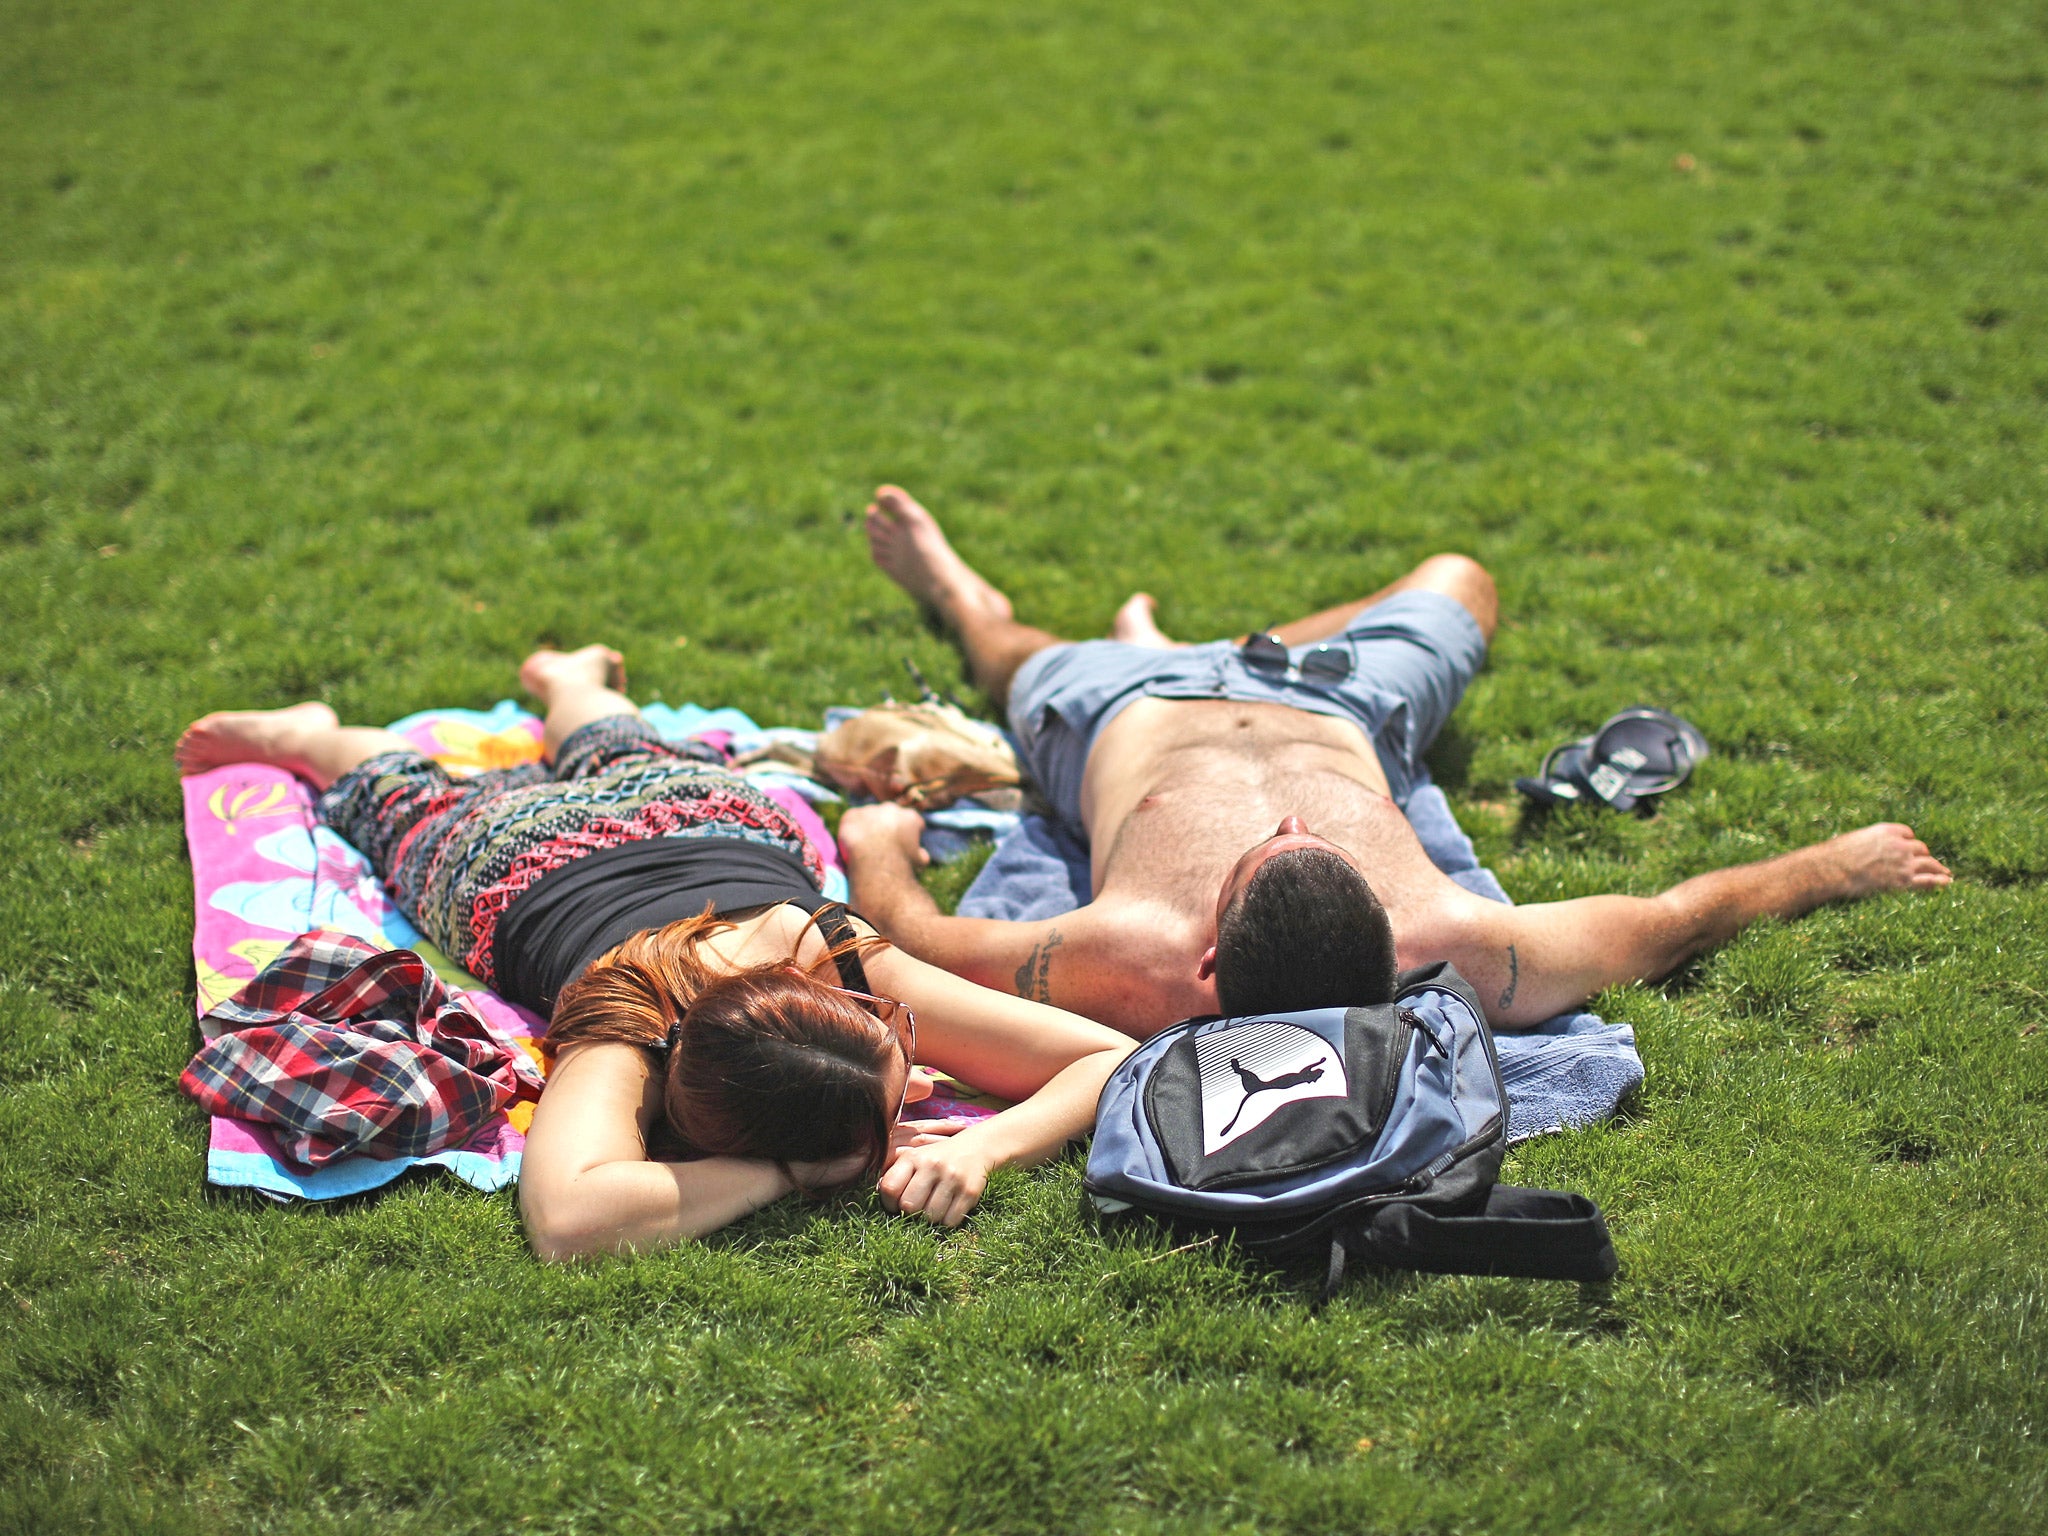 Britain experienced its third warmest spring